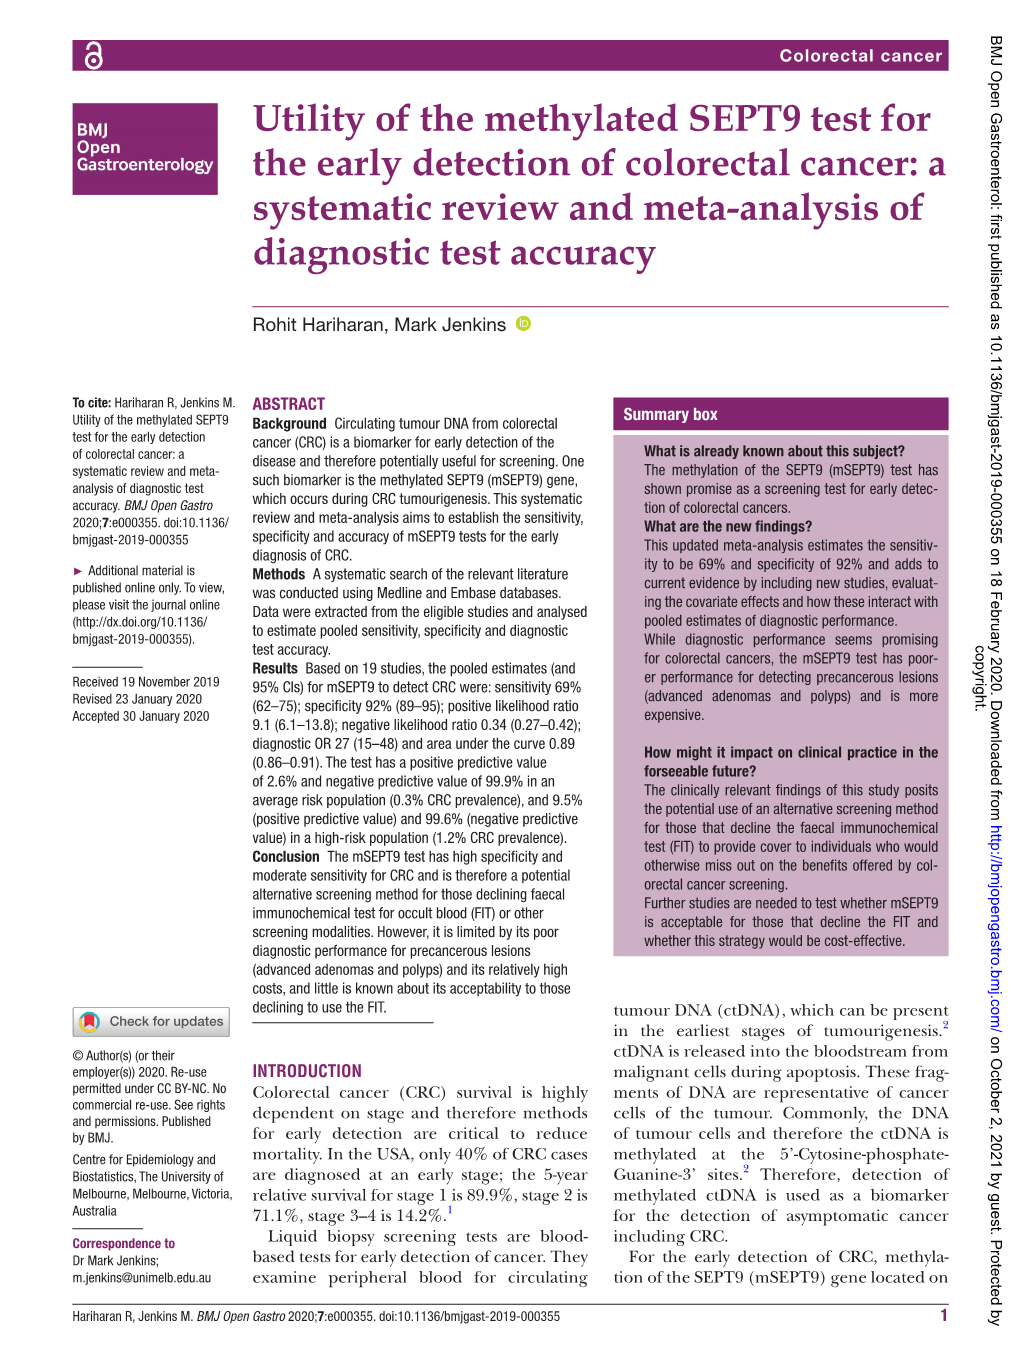 Utility of the Methylated SEPT9 Test for the Early Detection of Colorectal Cancer: a Systematic Review and Meta-­Analysis of Diagnostic Test Accuracy